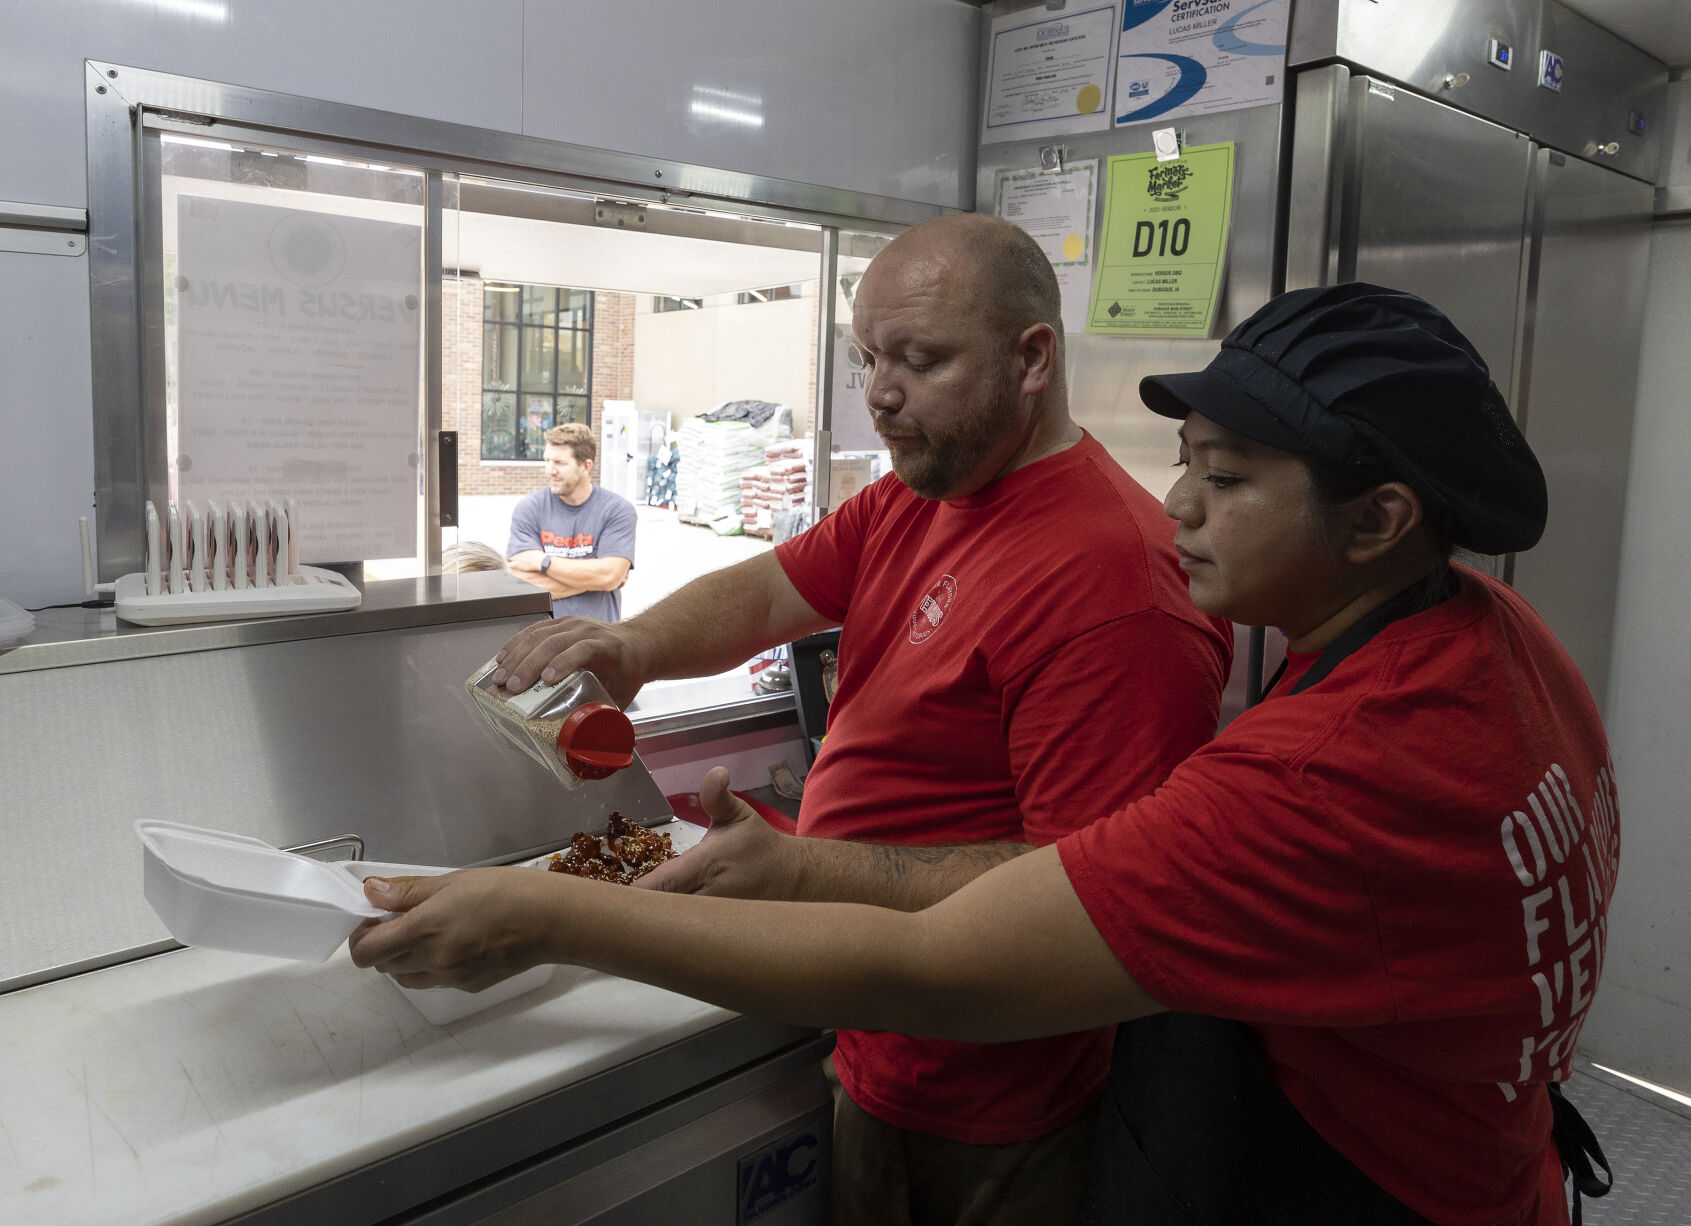 Versus food truck co-owners Lucas and Liberty Miller prepare an order while parked in a lot in Peosta, Iowa, on Friday, Sept. 22, 2023.    PHOTO CREDIT: File photo